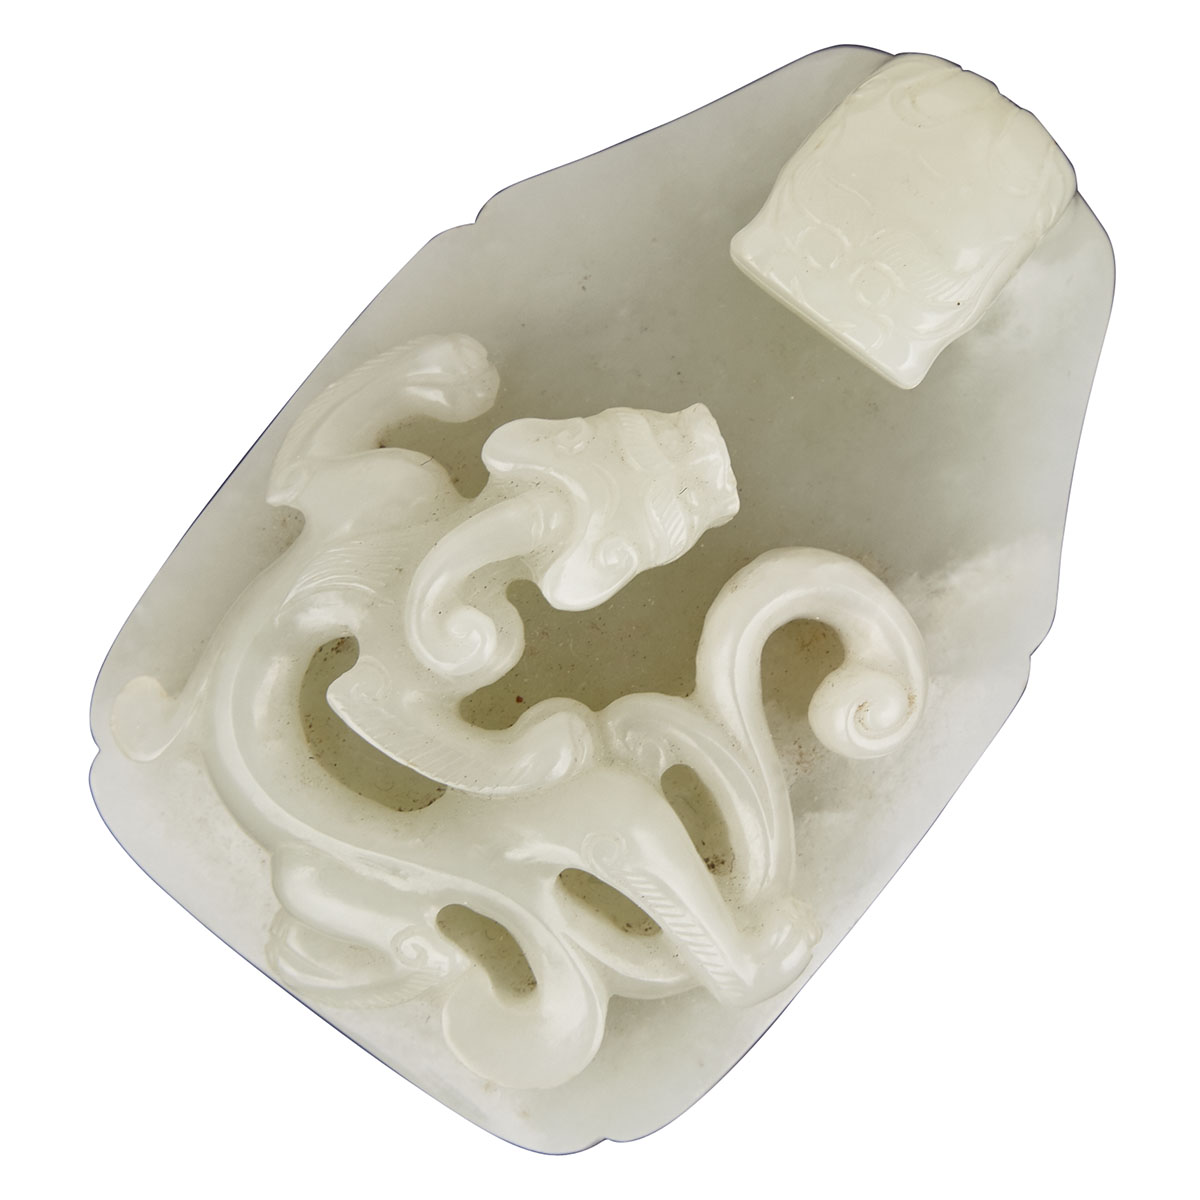 A Finely Carved Pale Celadon Jade Belt Hook, Qing Dynasty, 18th/19th Century